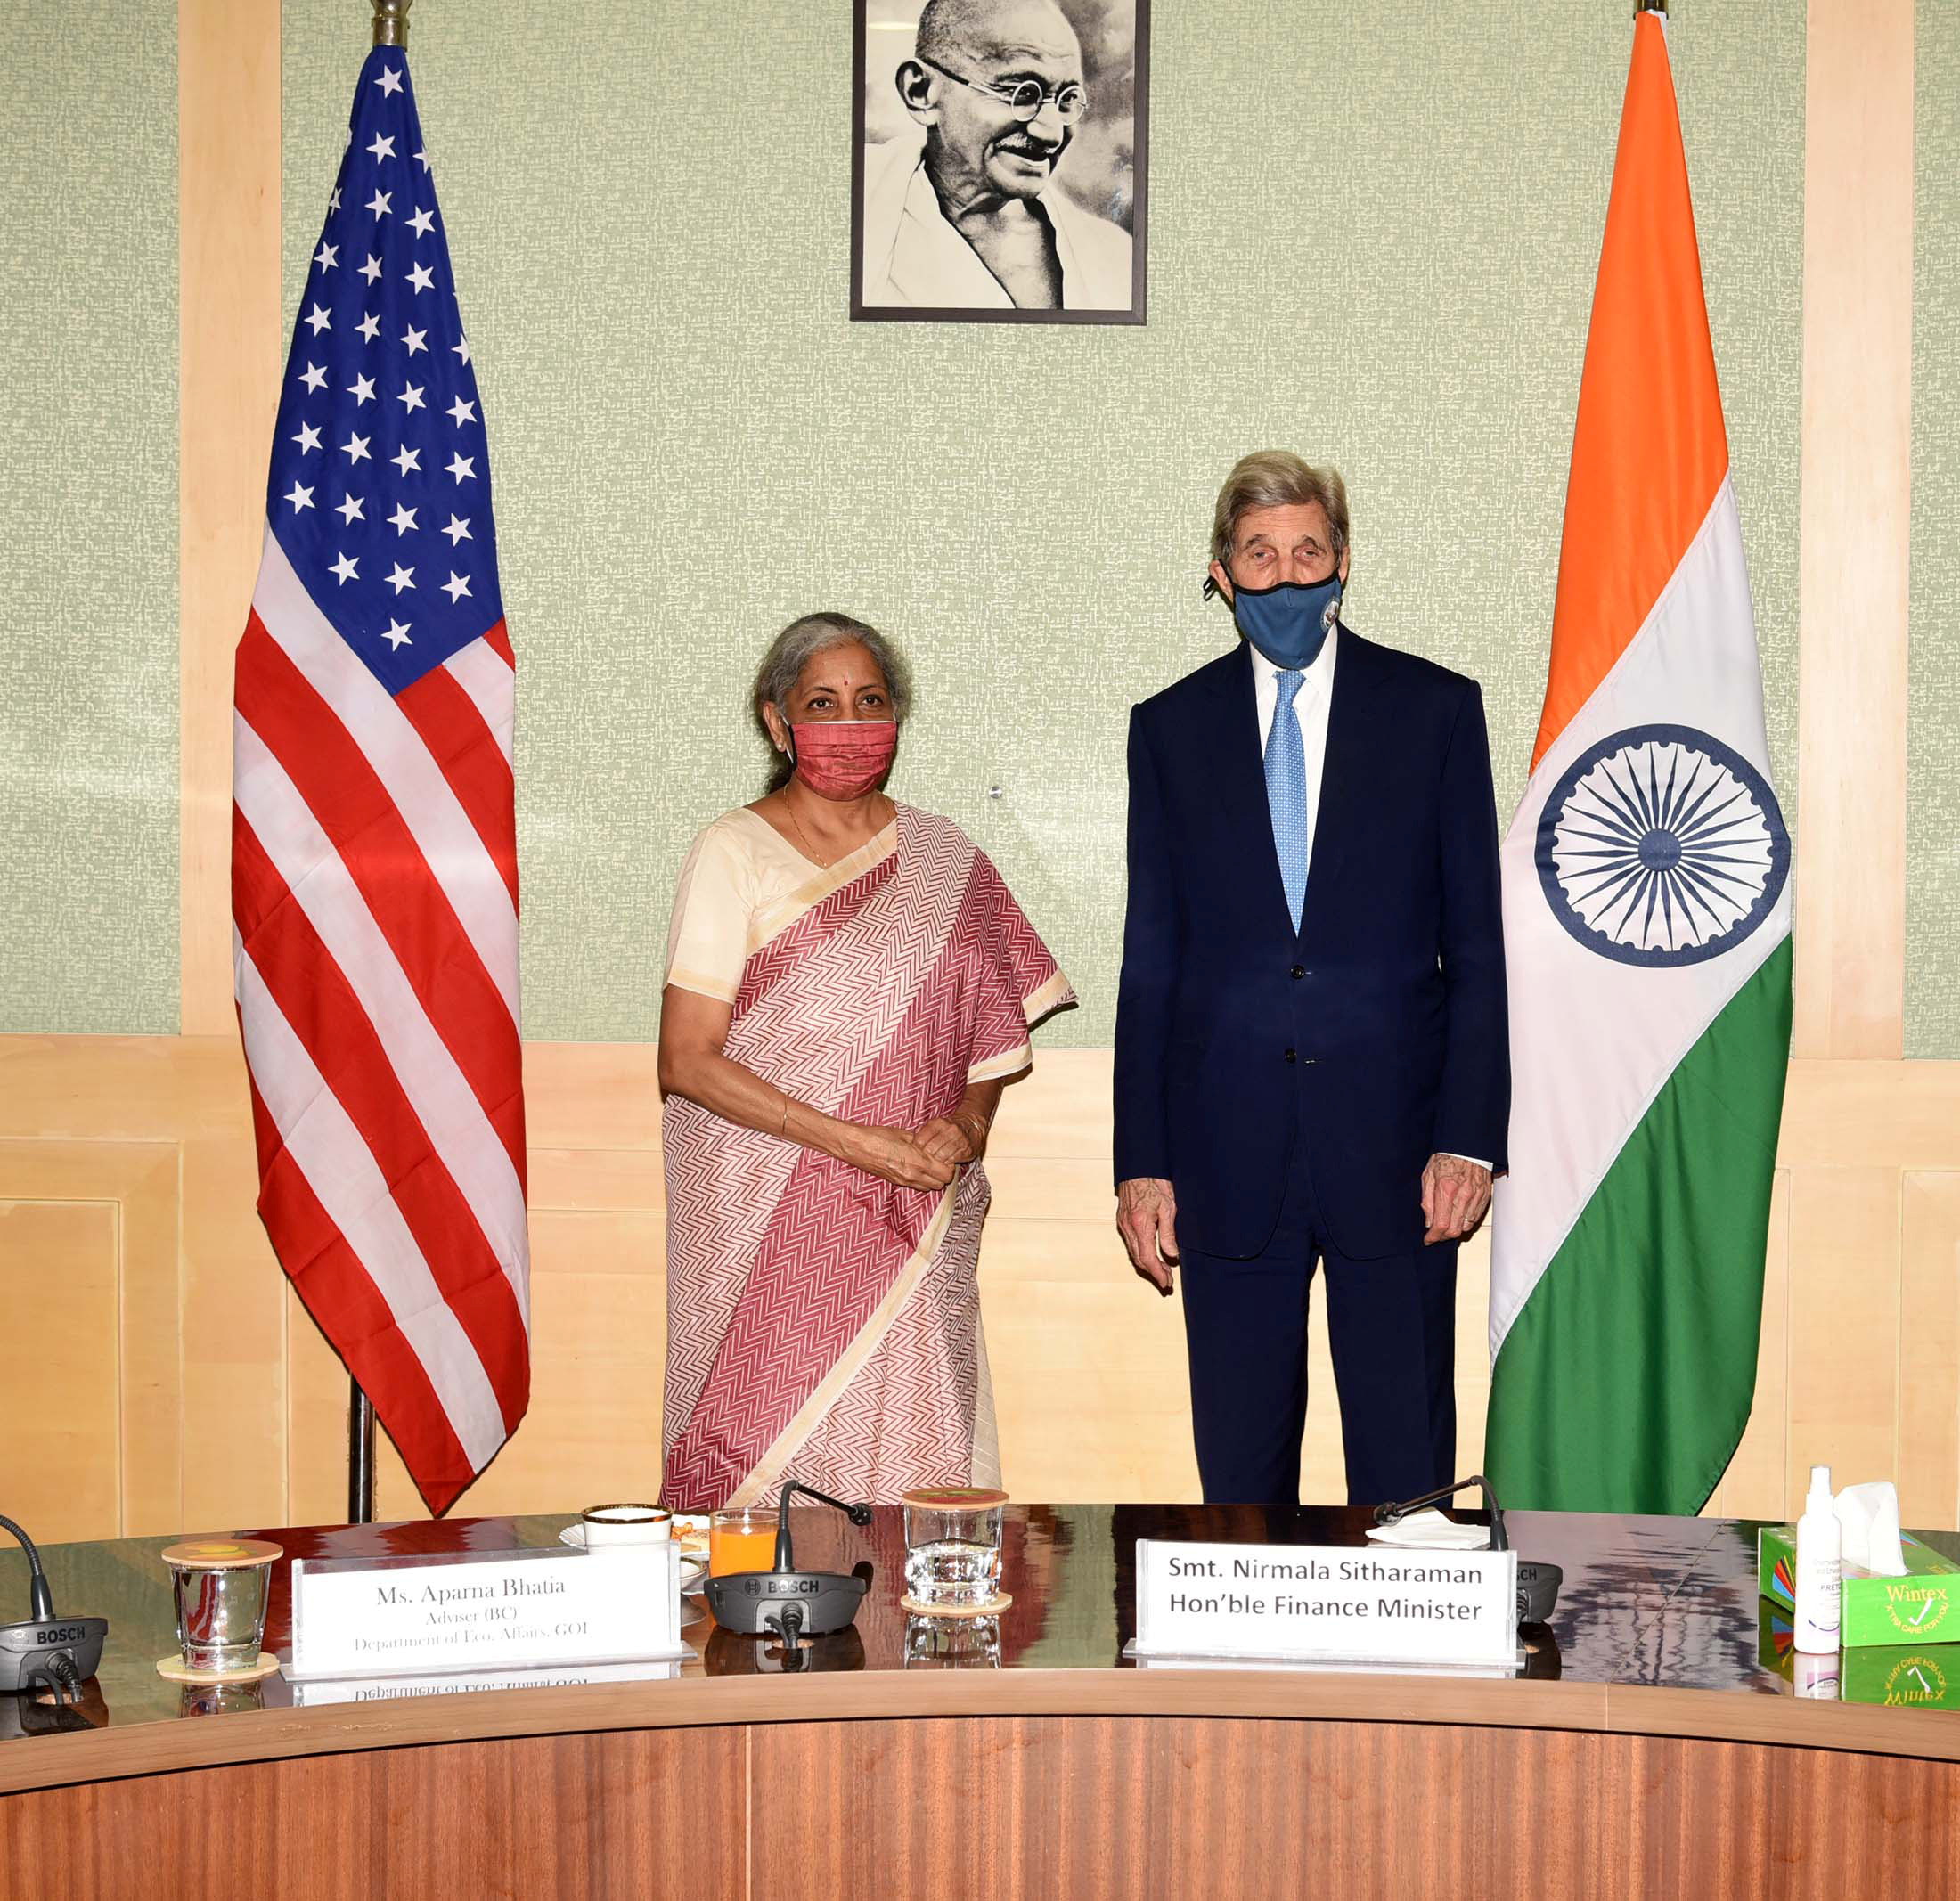 U.S. Special Presidential Envoy for Climate John Kerry meets with India's Finance Minister Nirmala Sitharaman in New Delhi